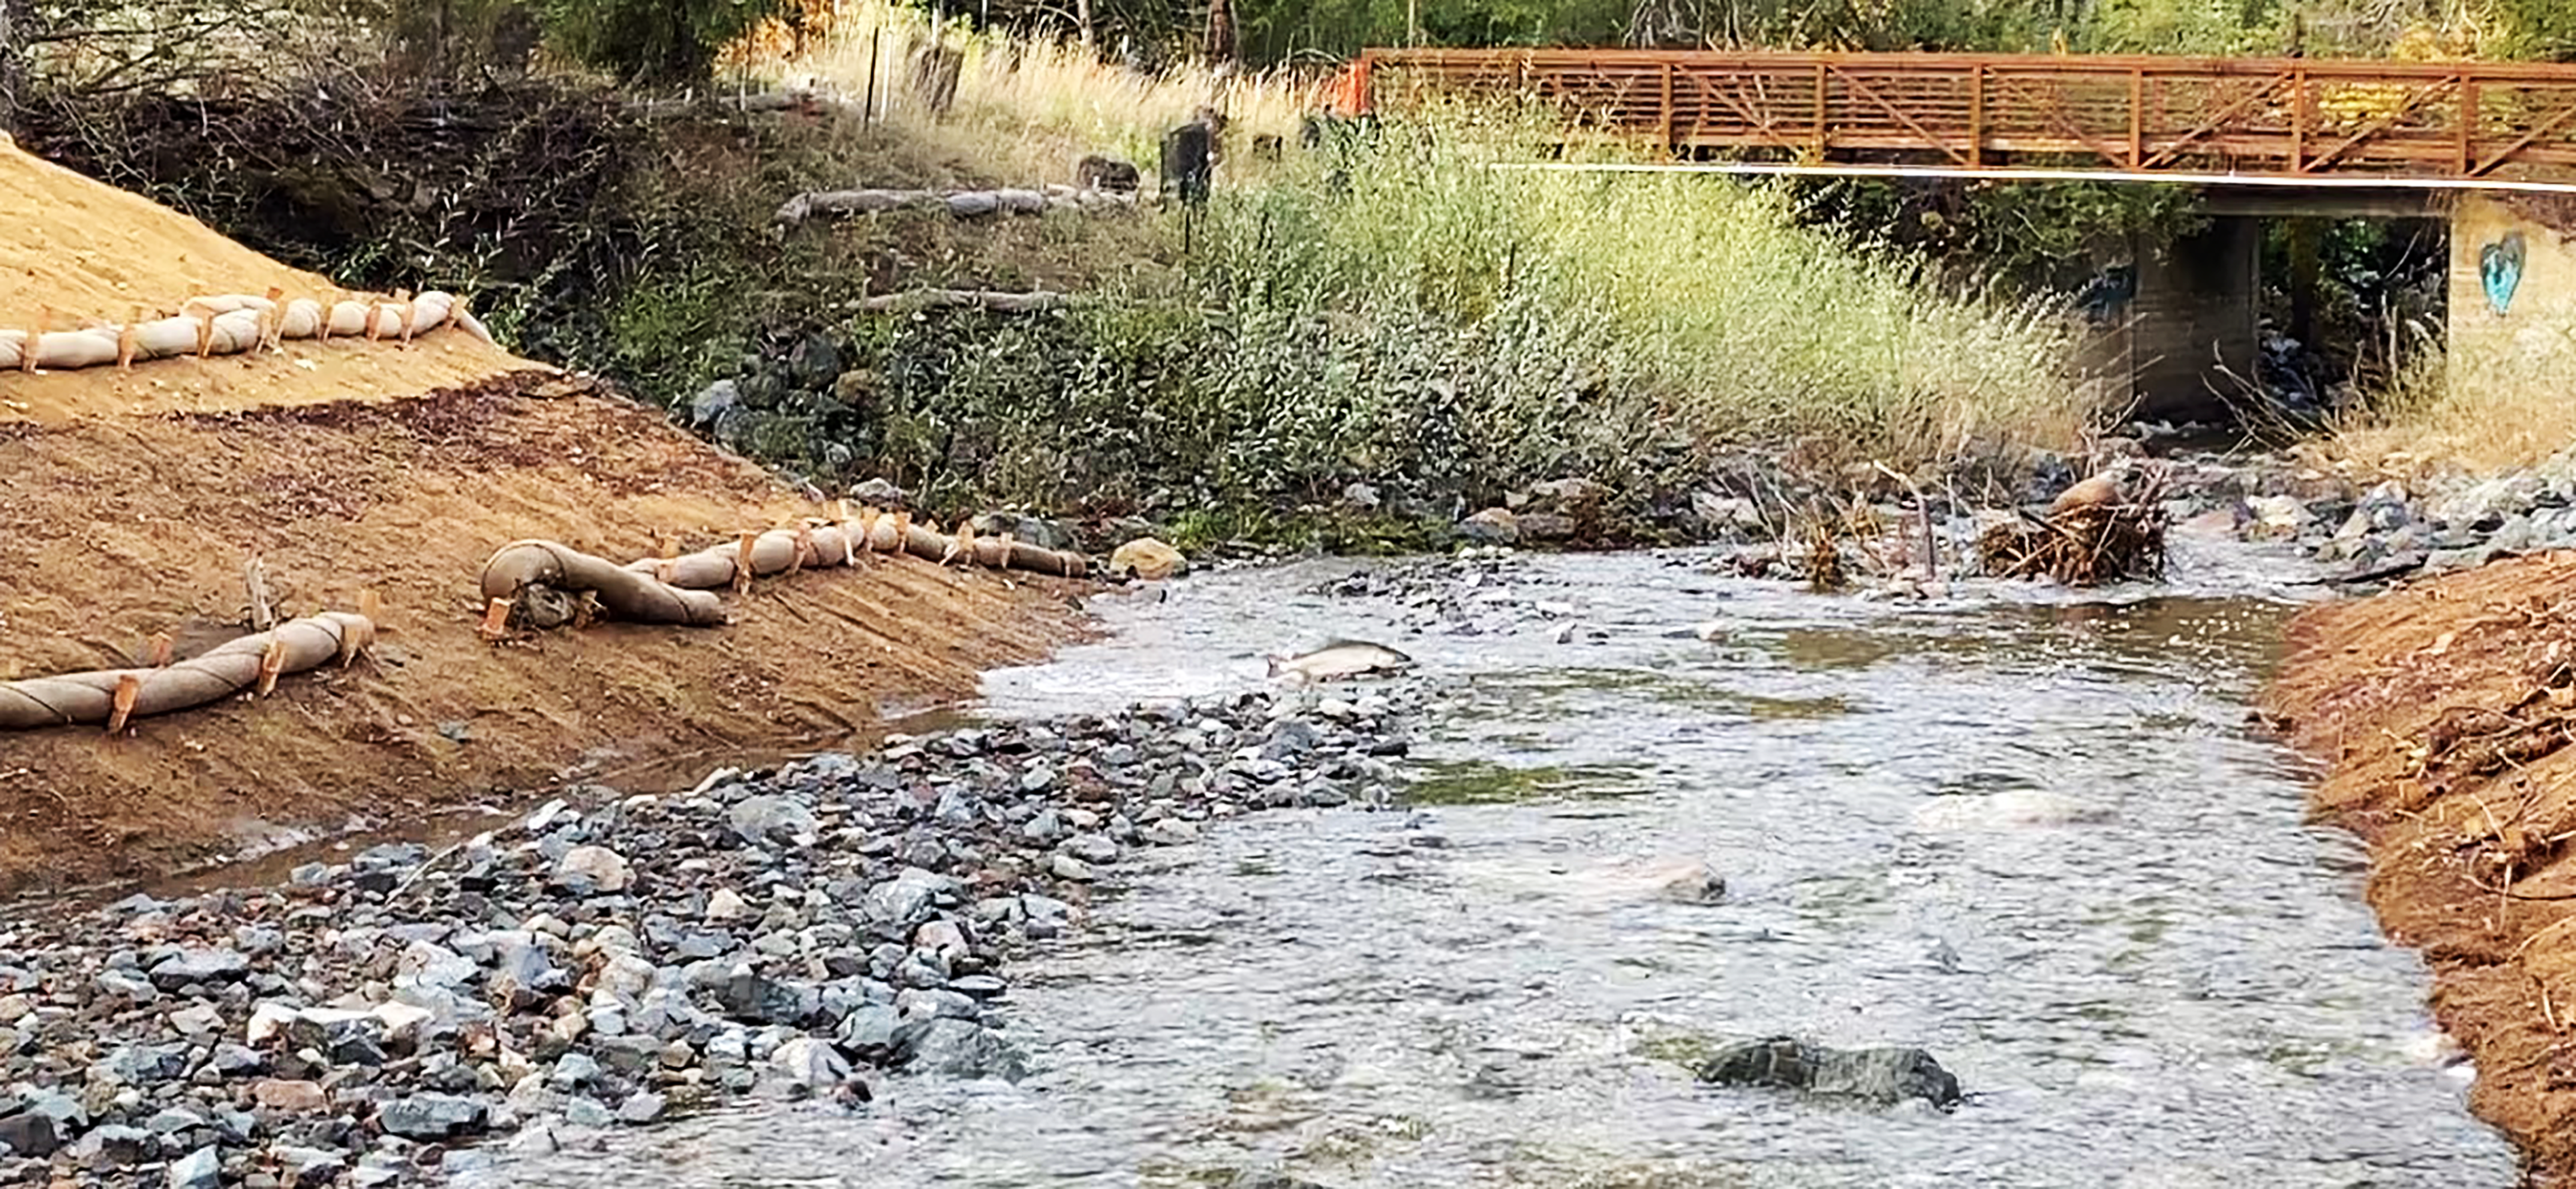 Videos Show Salmon Returning to Marin County Creeks for Spawning Season